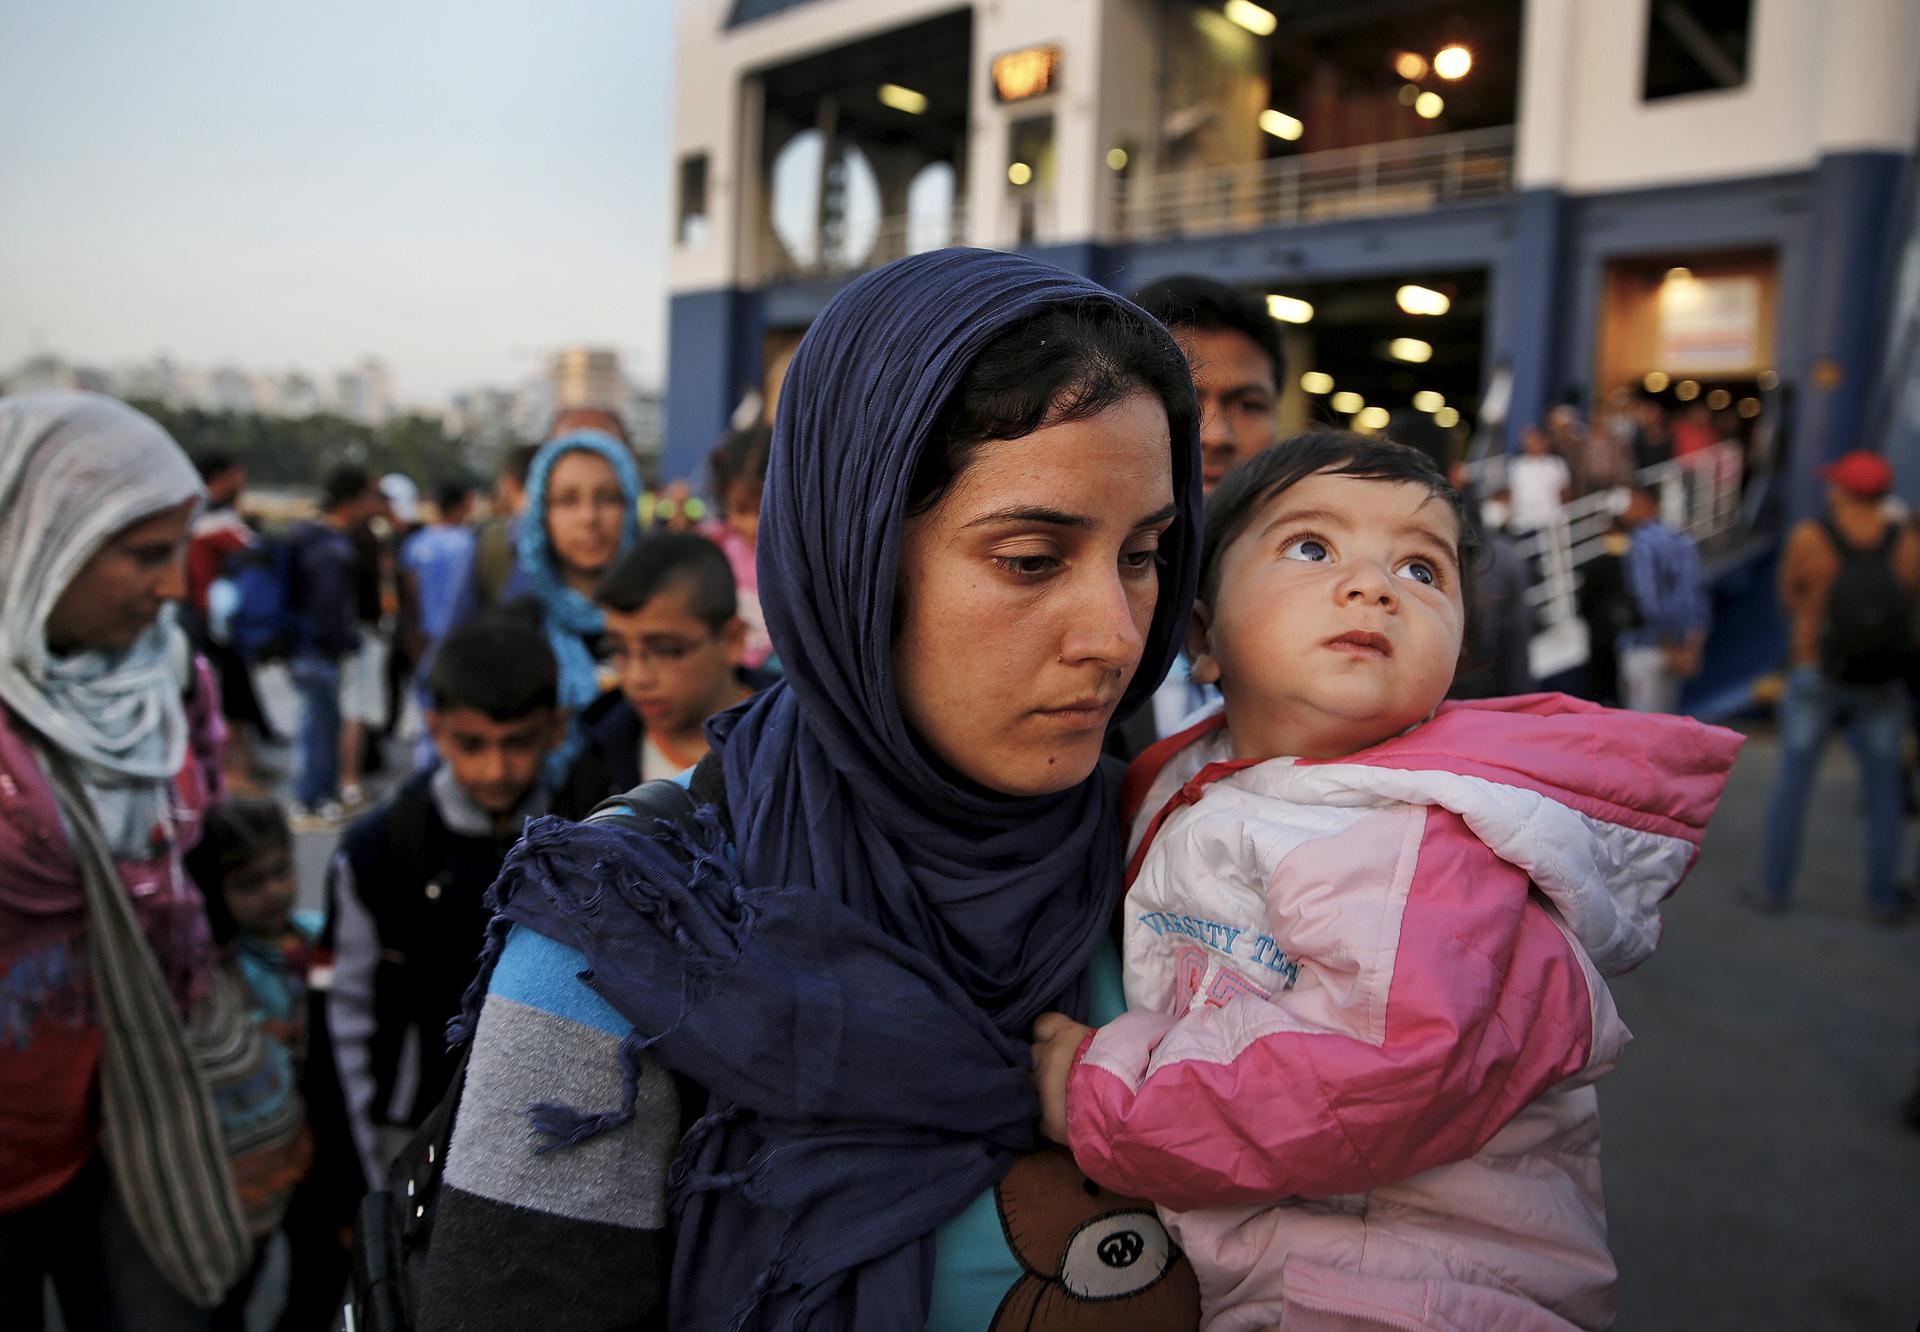 Syrian refugees disembarked from a Greek ferry near Athens on June 14, 2015. Over 1,800 predominantly Syrian refugees and other immigrants who crossed the sea from the Turkish coast to the Greek island of Lesbos were ferried to Athens after the Greek auth